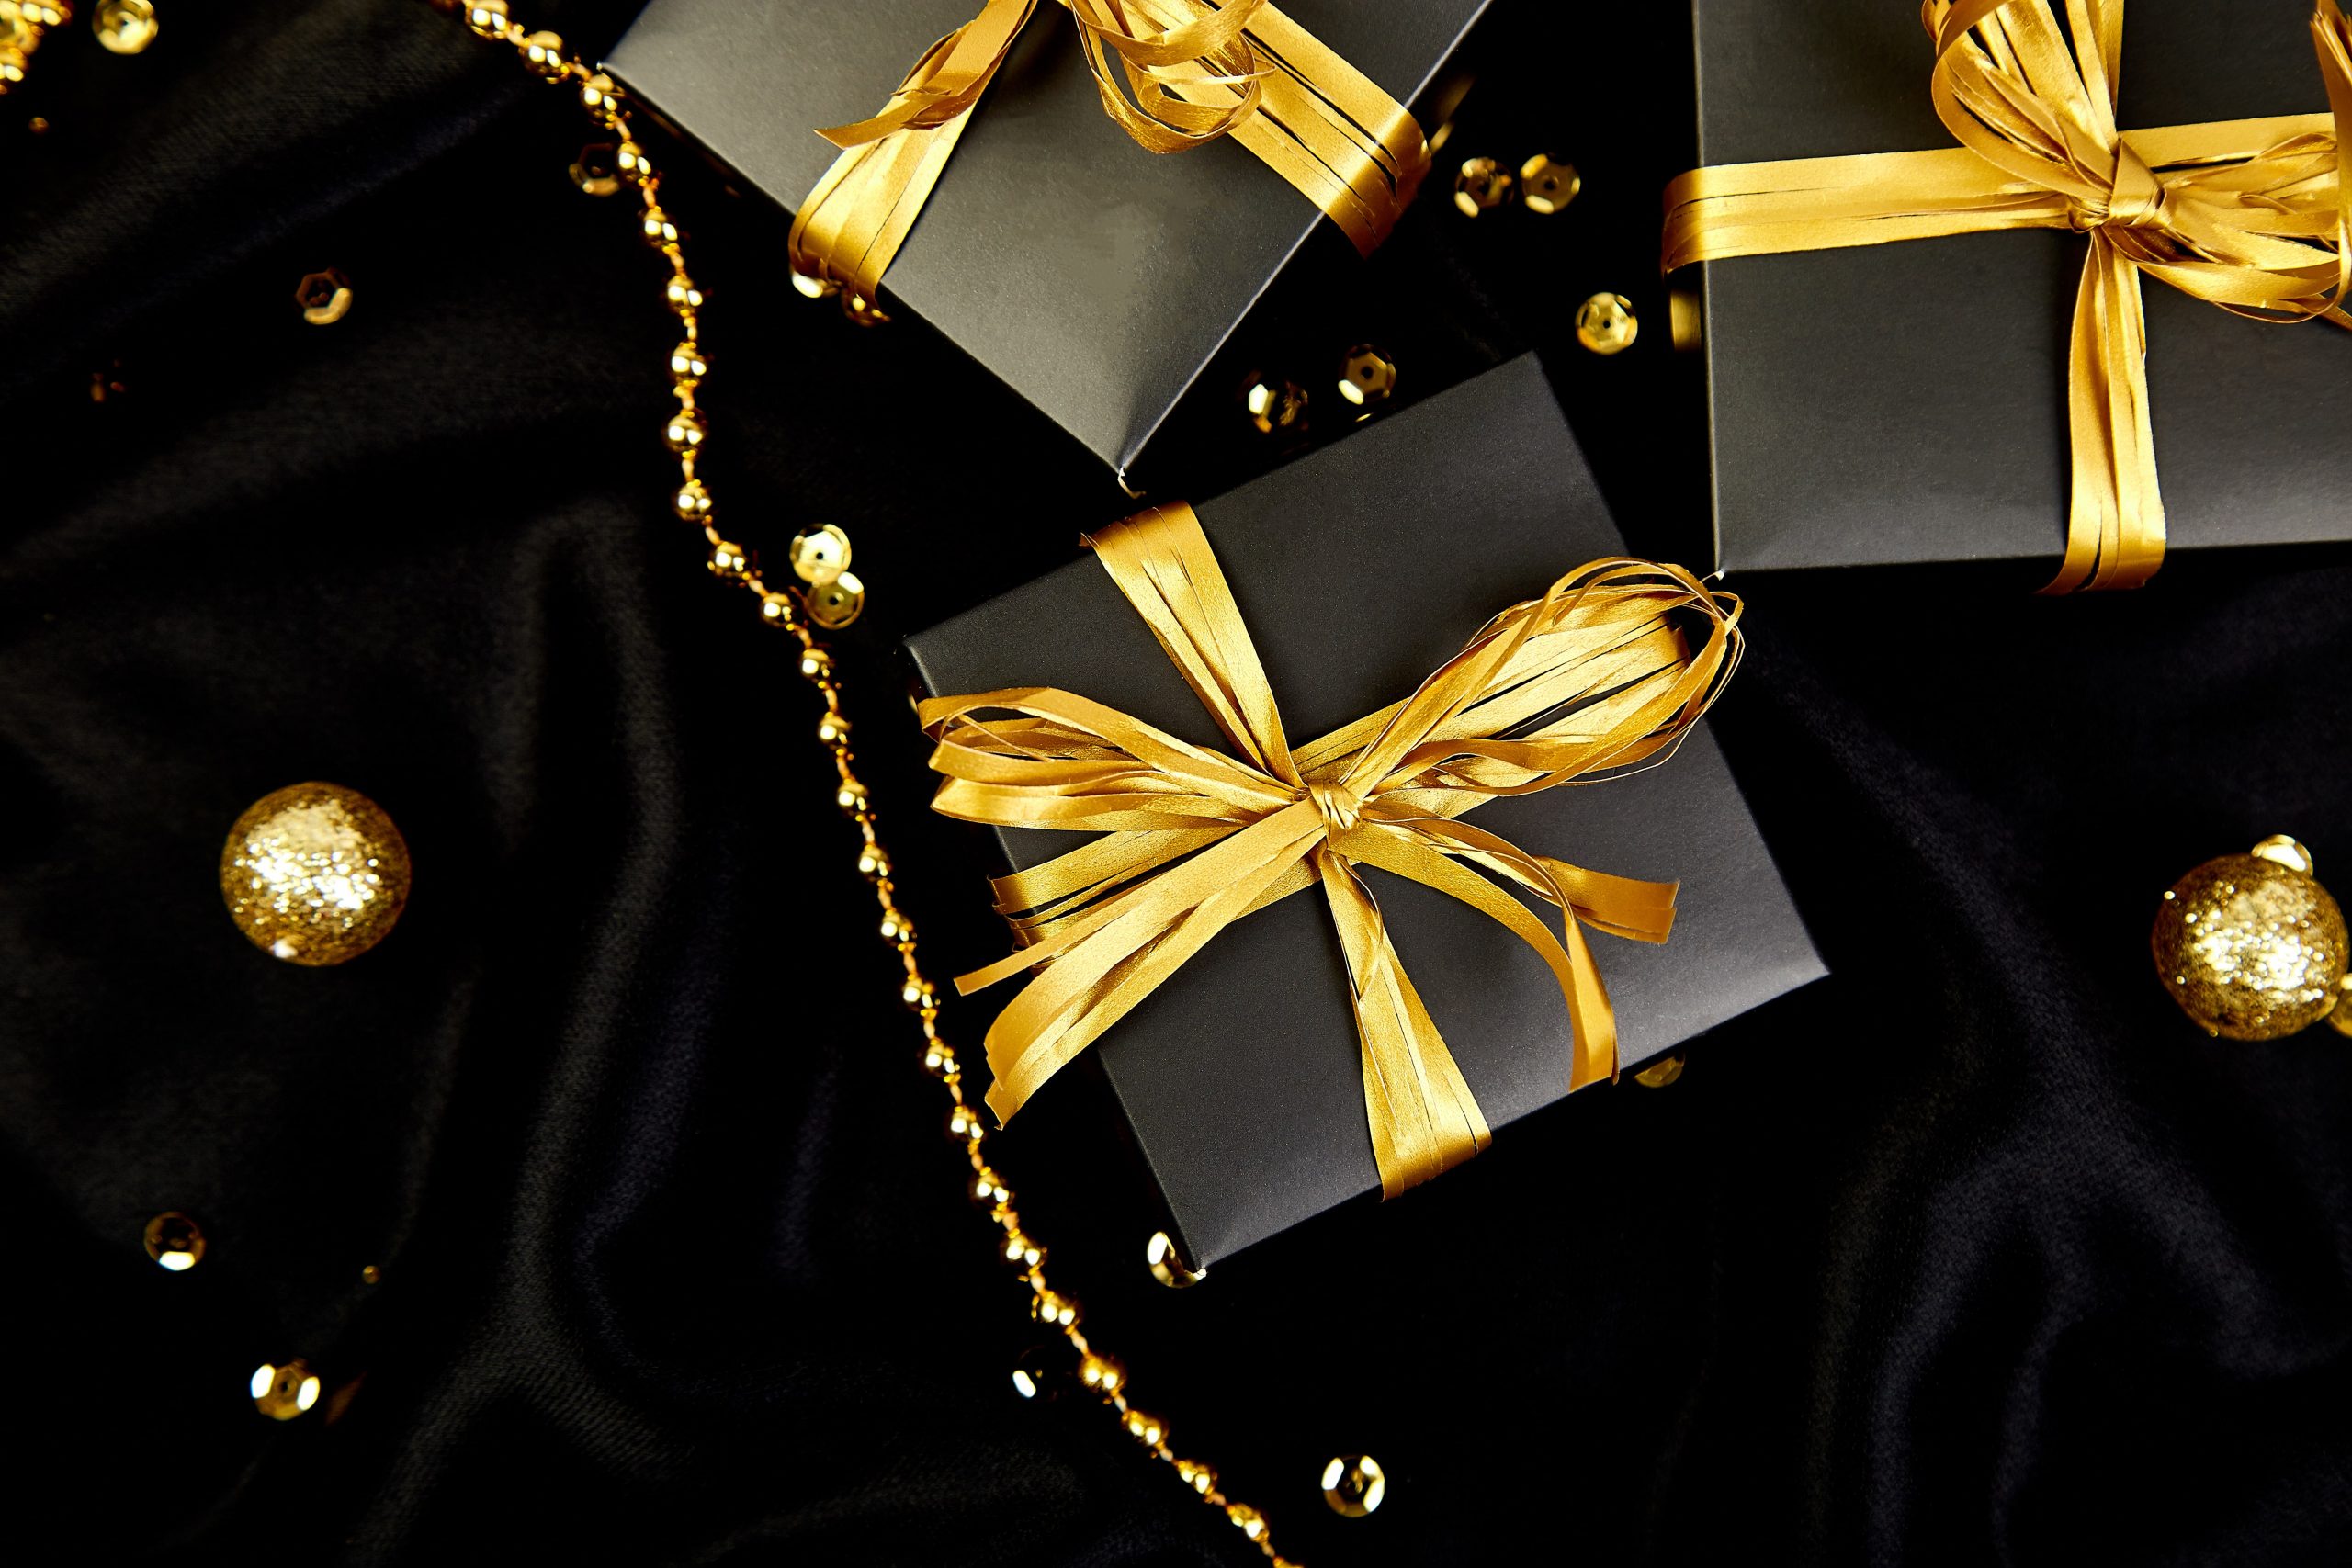 Top 5 Luxury Gifts For The Special Someone